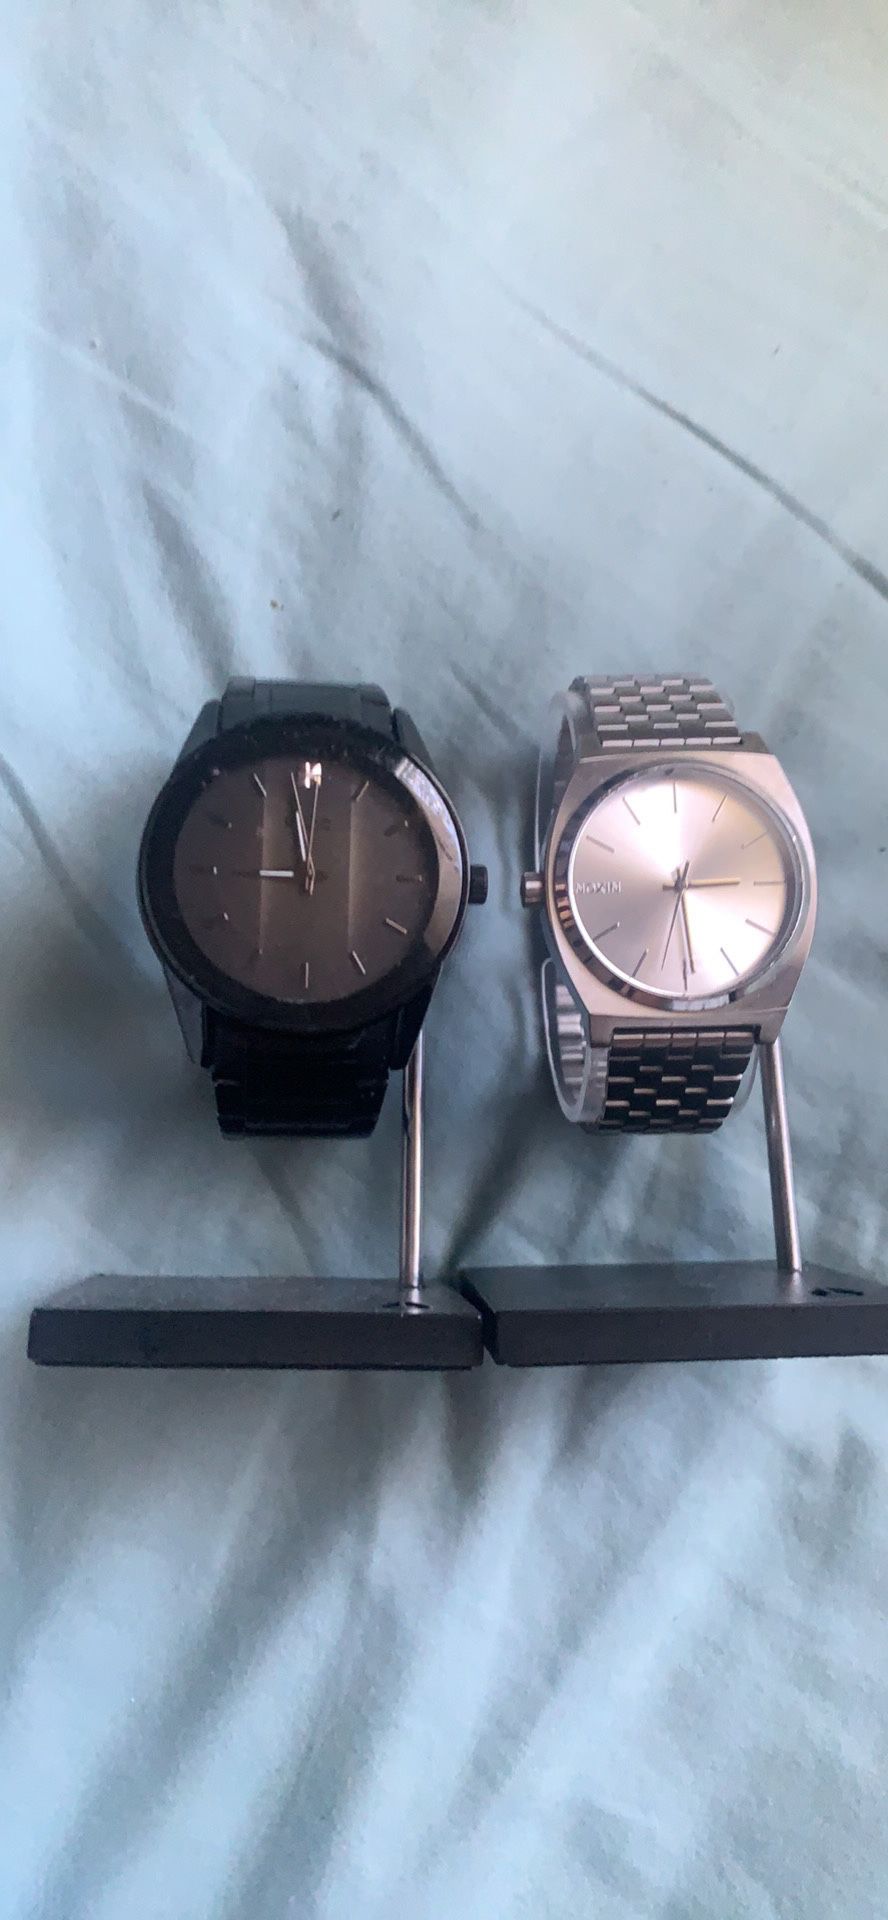 2 High end watches